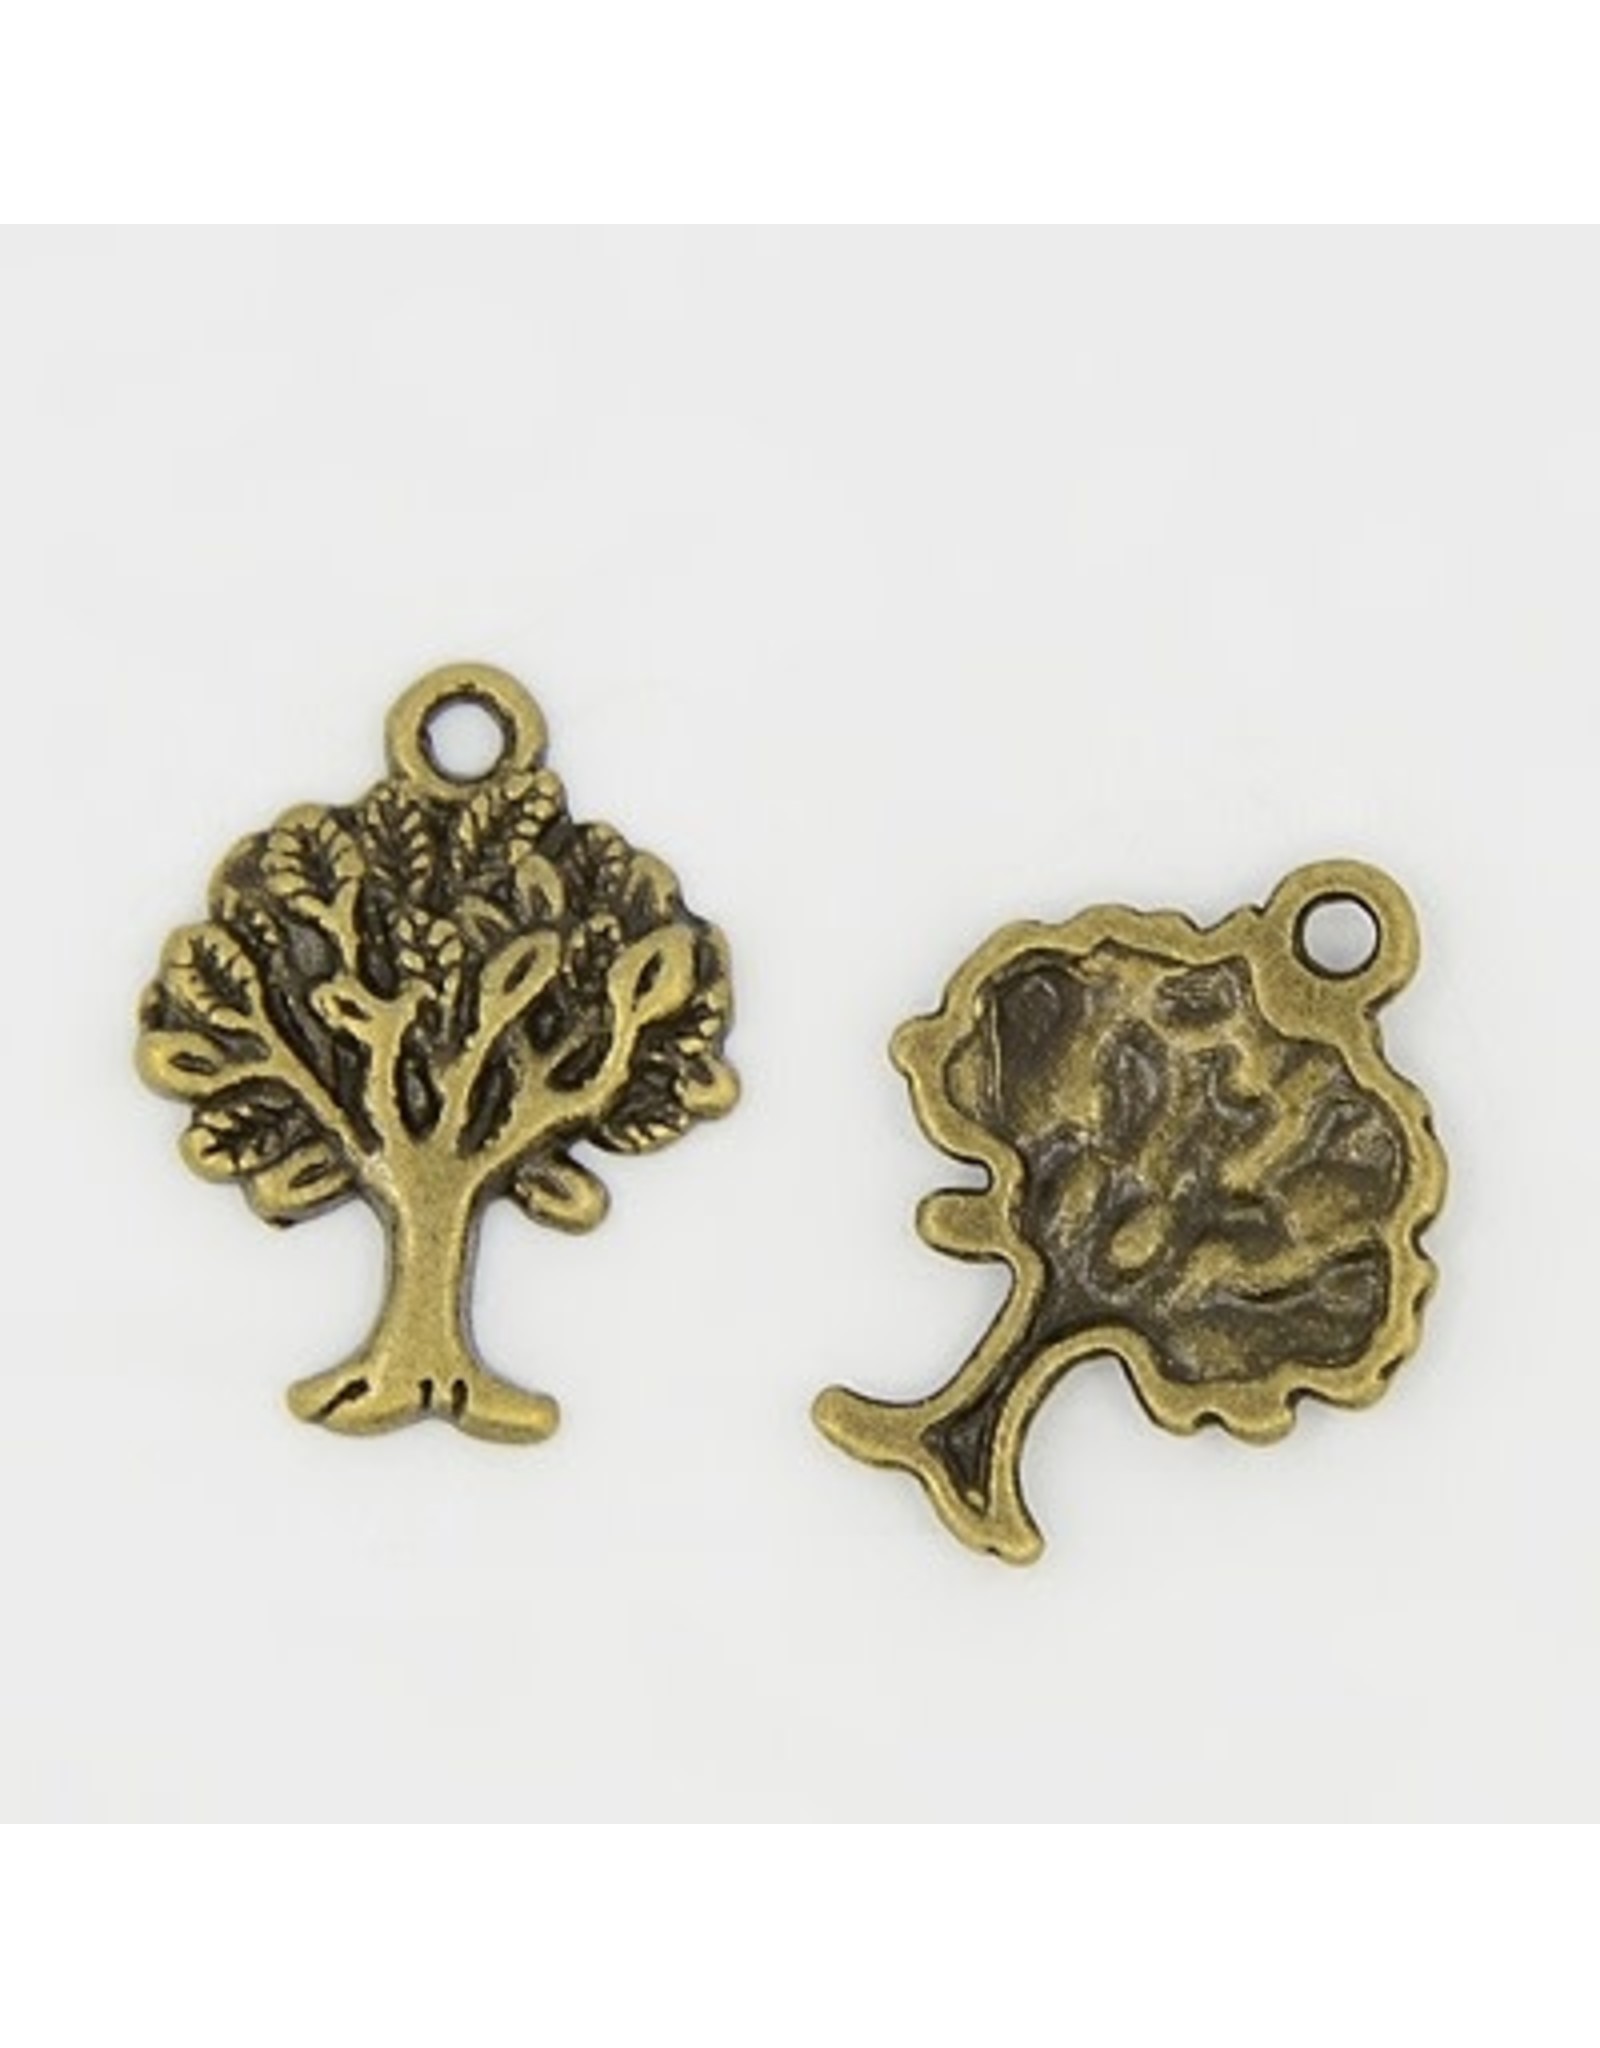 Tree of Life  25x15mm Antique Brass   NF  x10